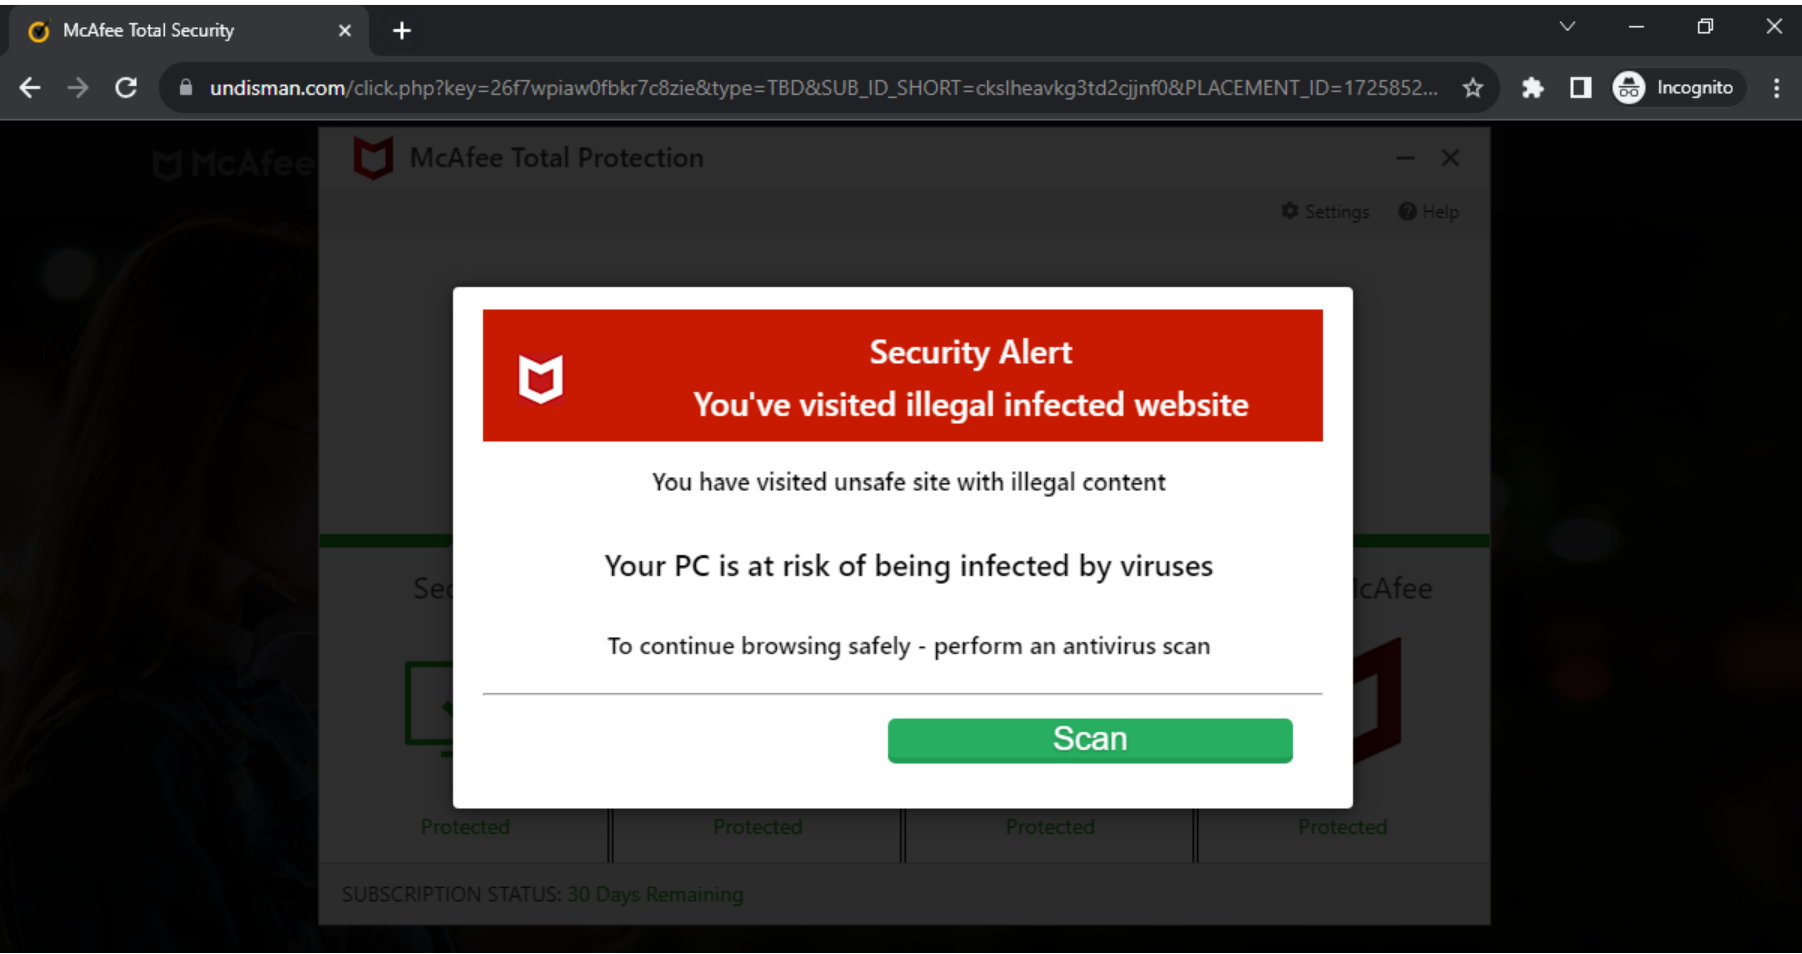 Image 11 is a screenshot of a popup using the McAfee logo to warn the end user of a security alert. You’ve visited illegal infected website. You have visited unsafe site with illegal content. Your PC is at risk of being infected by viruses. To continue browsing safely — perform an antivirus scan. Scan button.